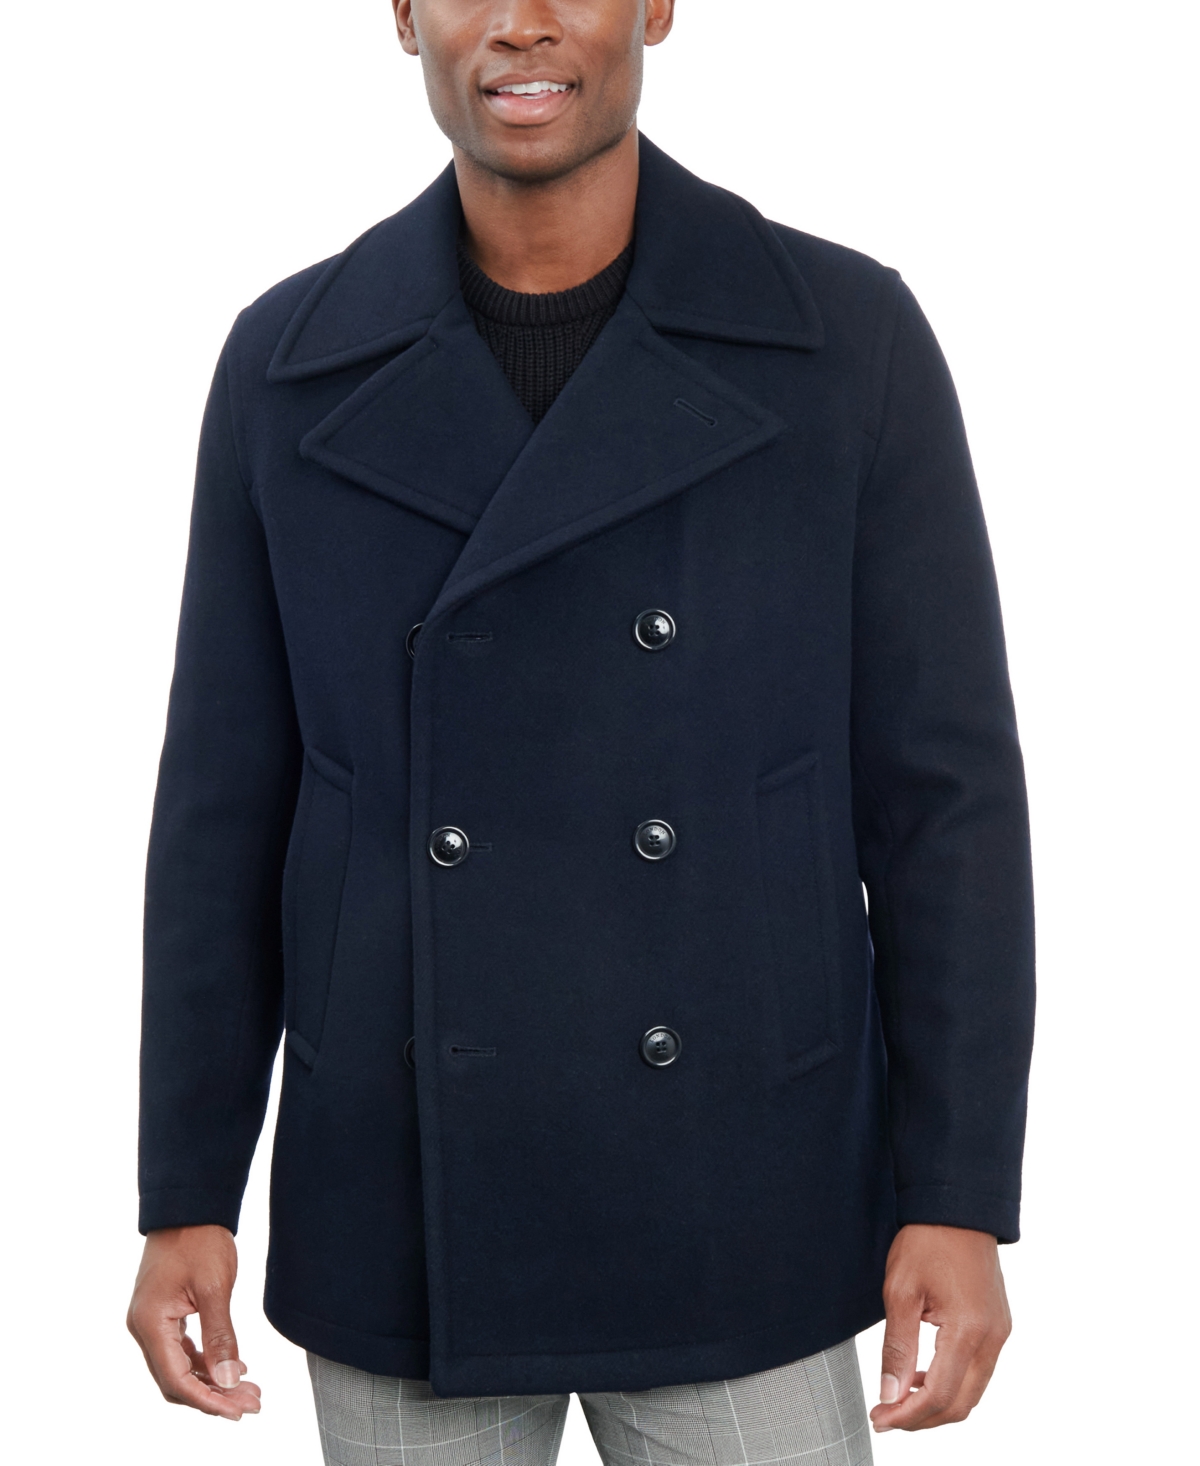 Men's Double-Breasted Wool Blend Peacoat - Navy